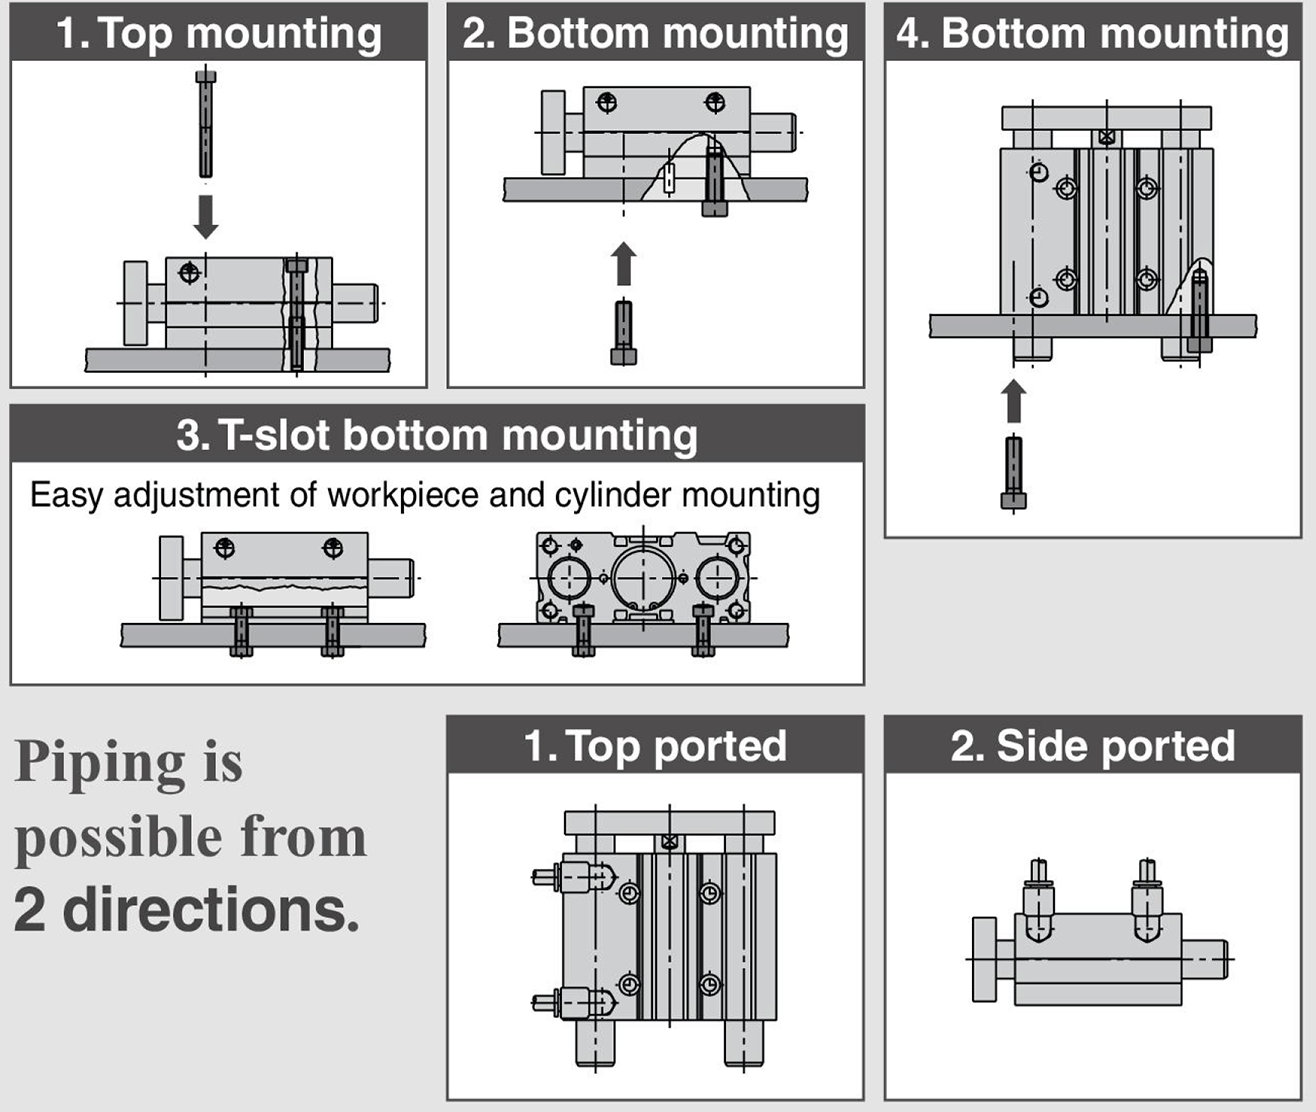 4 types of mounting / Piping from 2 directions 